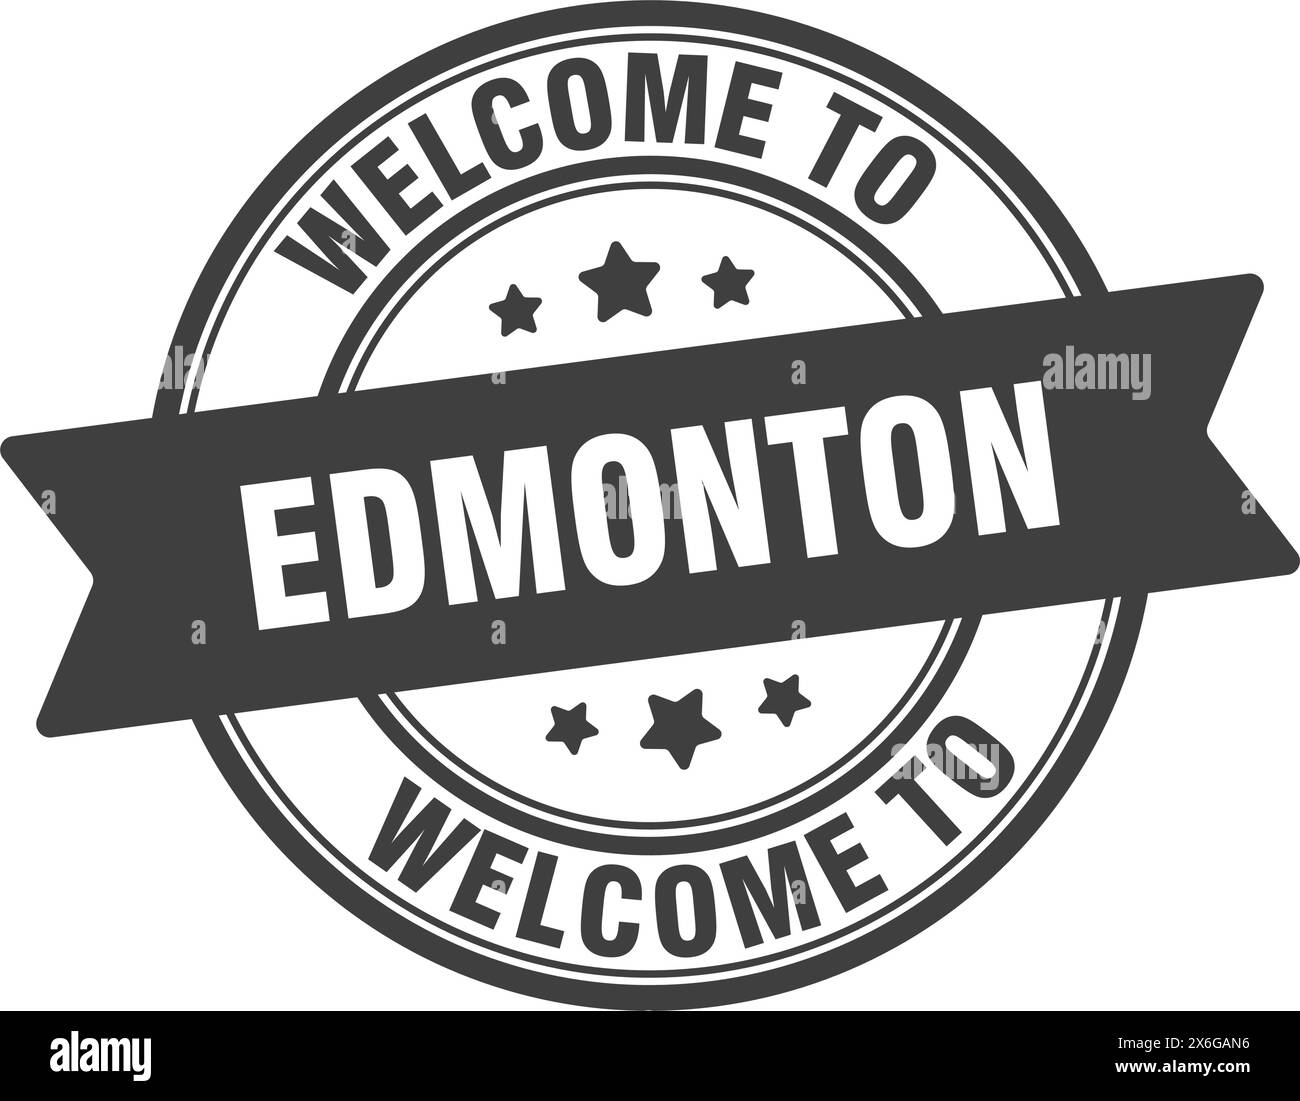 Welcome to Edmonton stamp. Edmonton round sign isolated on white background Stock Vector